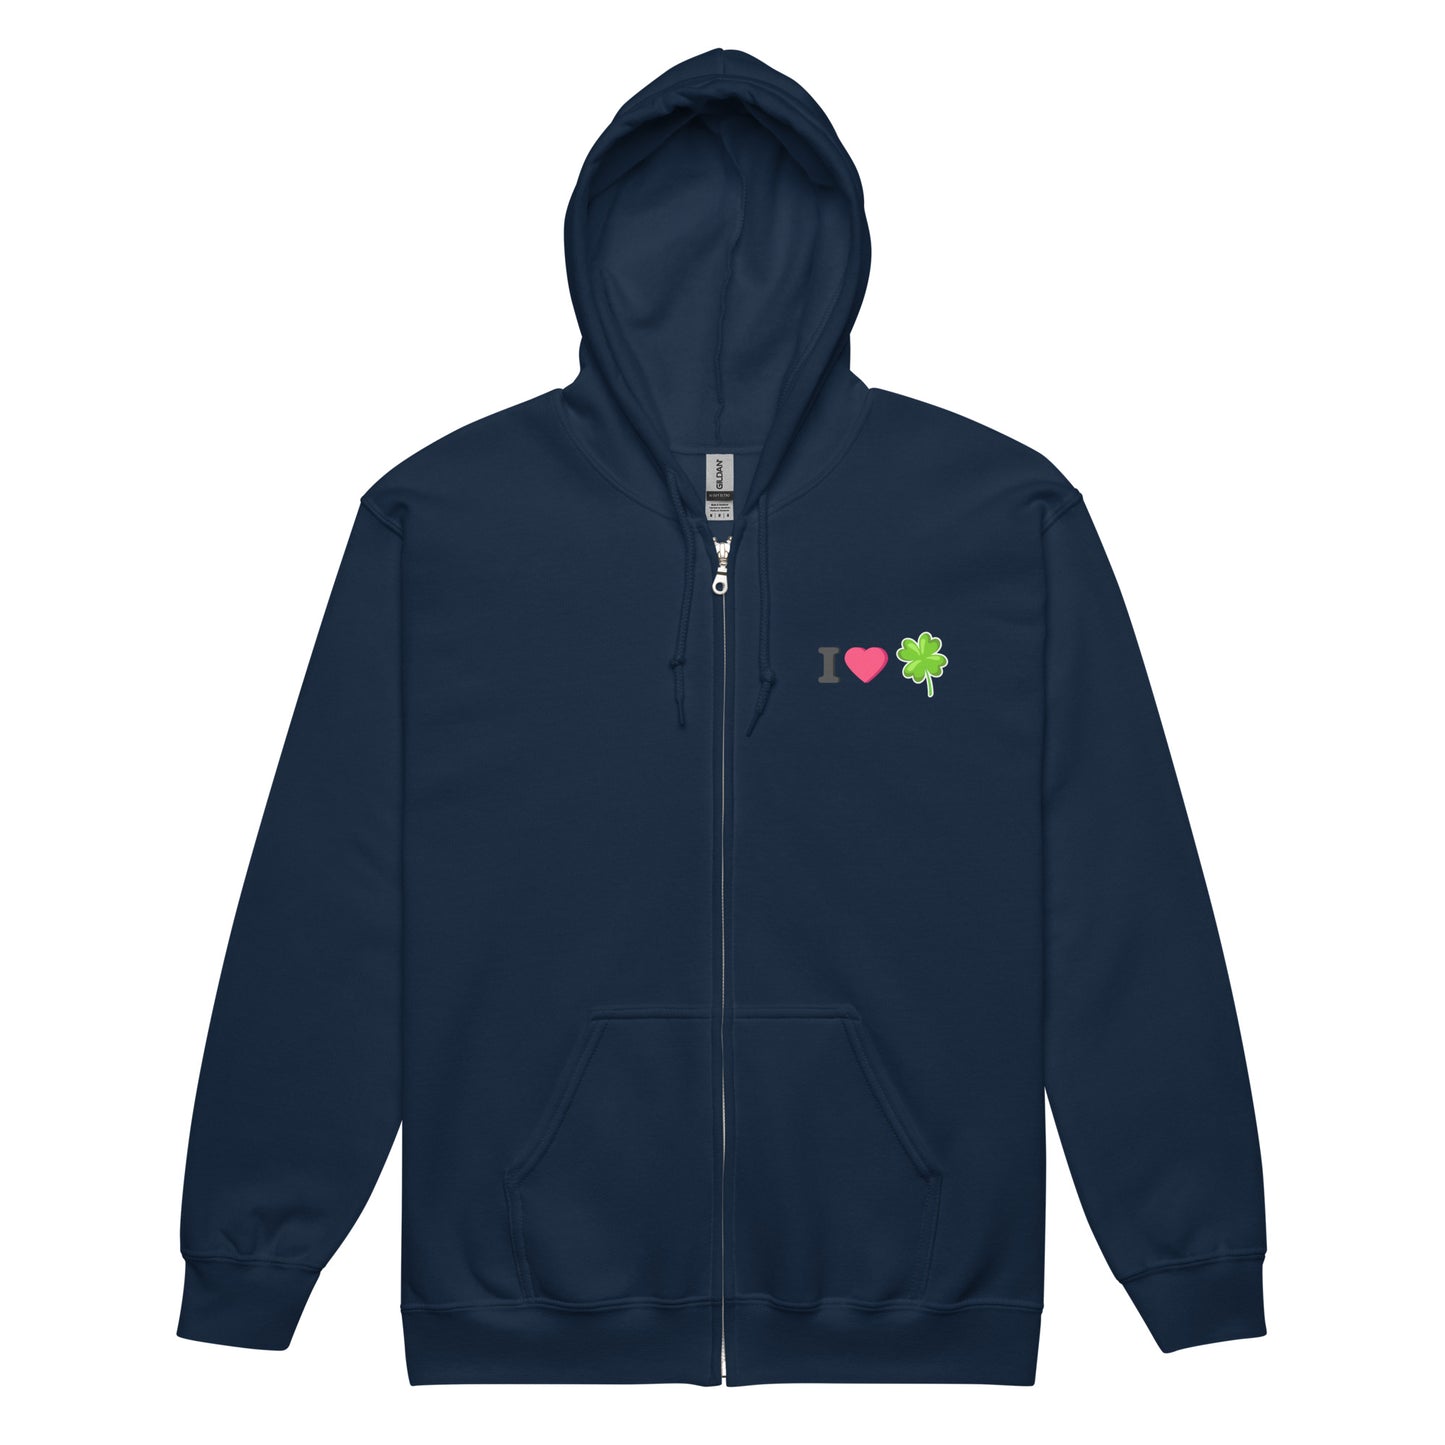 Navy graphic hoodie that says "I Love Luck"